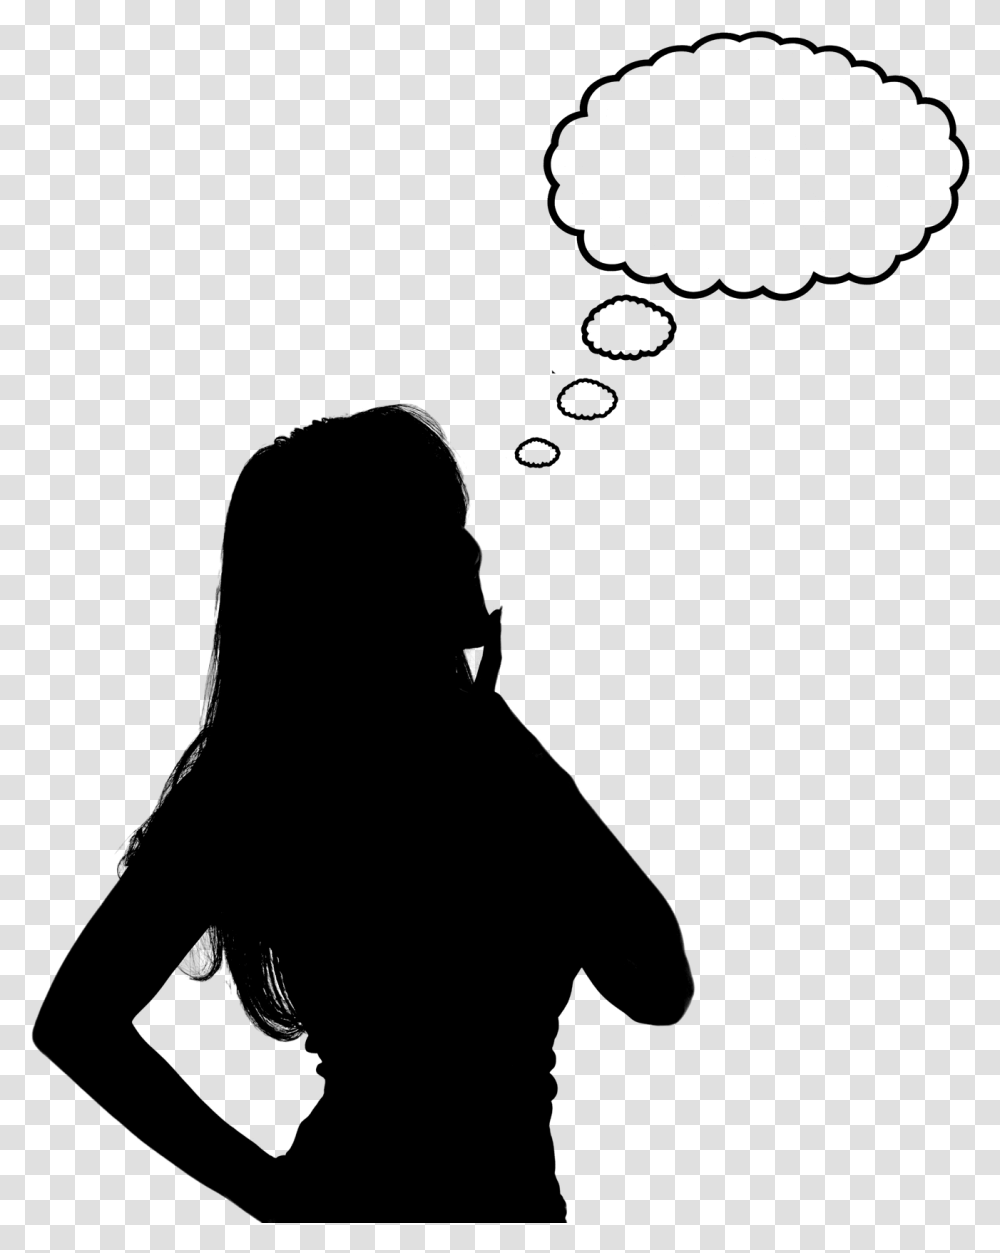 Thinking Woman Silhouette Silhouette Of A Girl Thinking, Gray Transparent Png